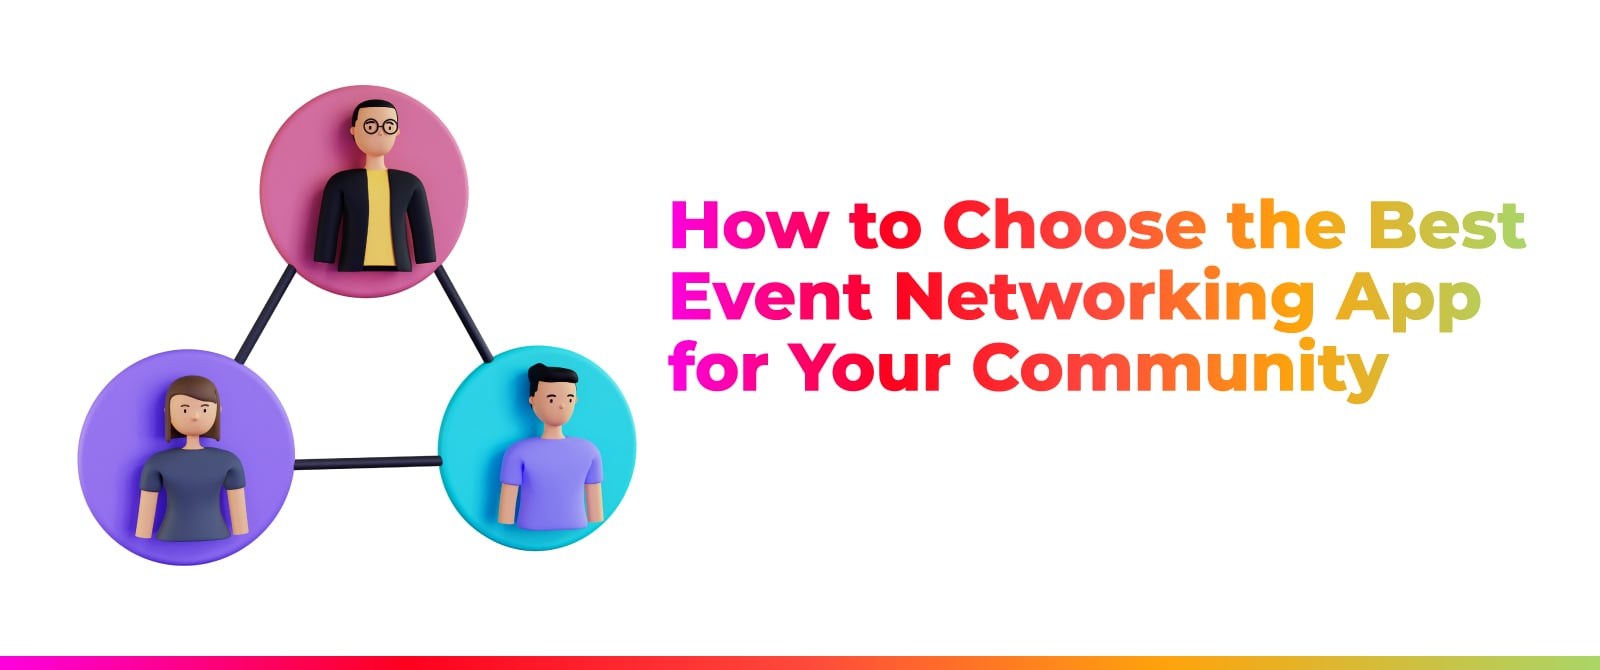 How to Choose the Best Event Networking App for Your Community